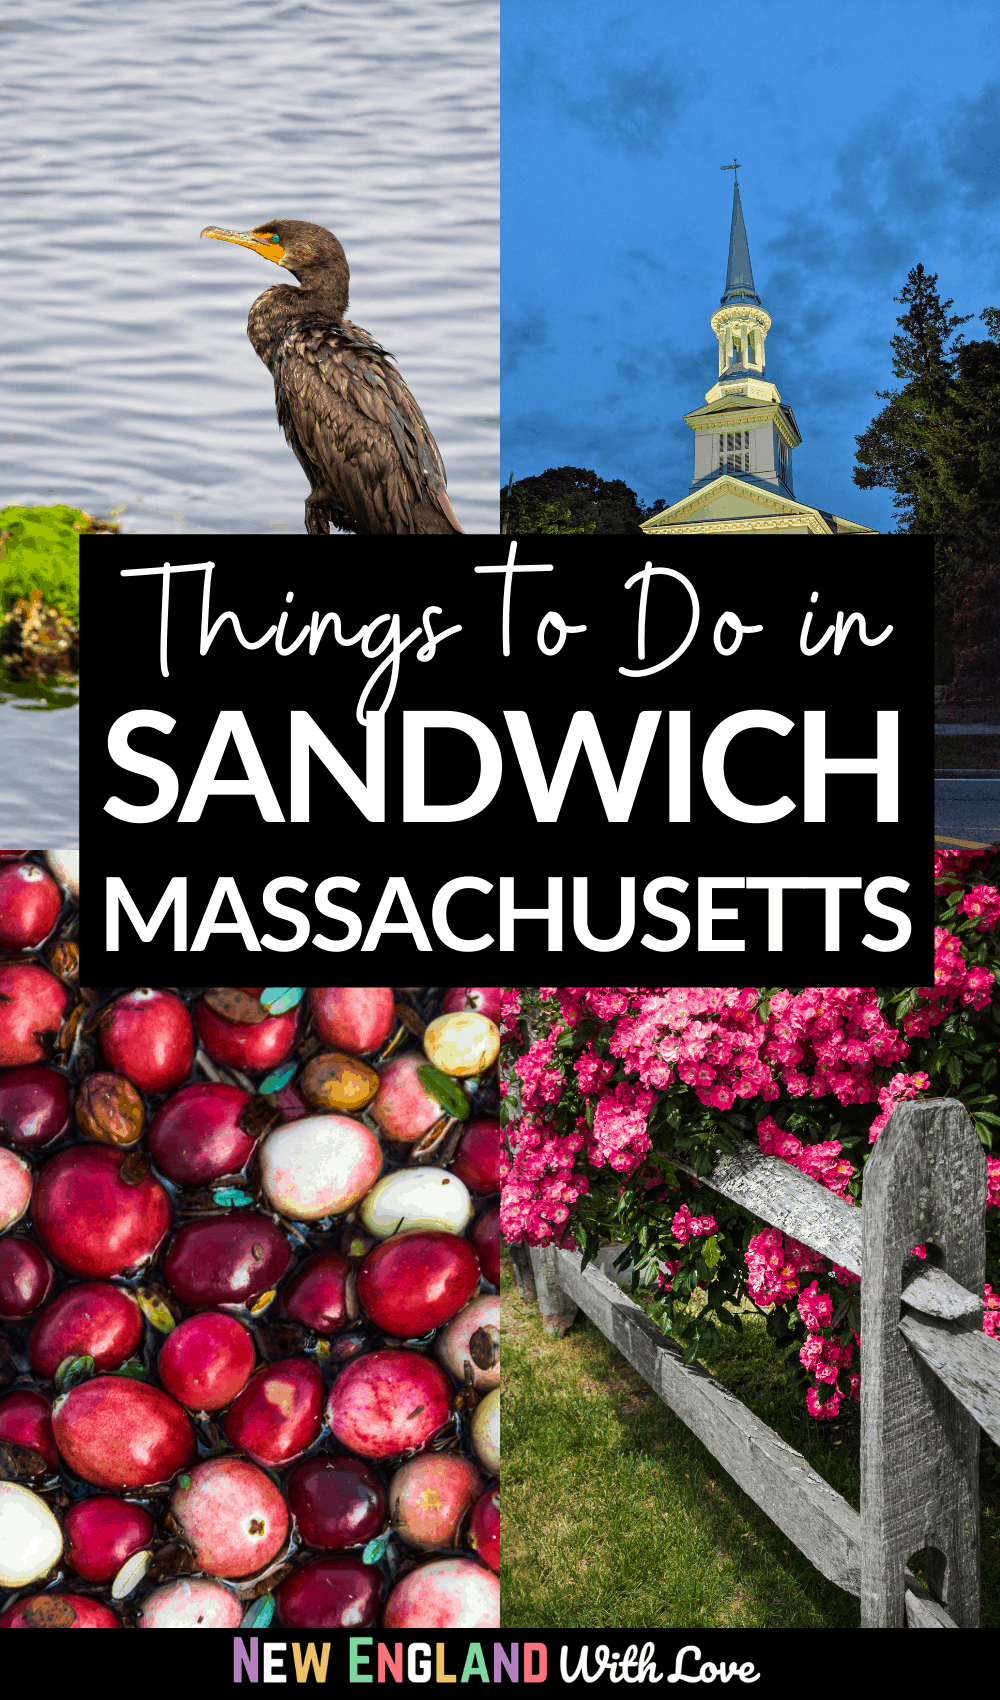 Pinterest graphic reading "Things To Do in SANDWICH Massachusetts"